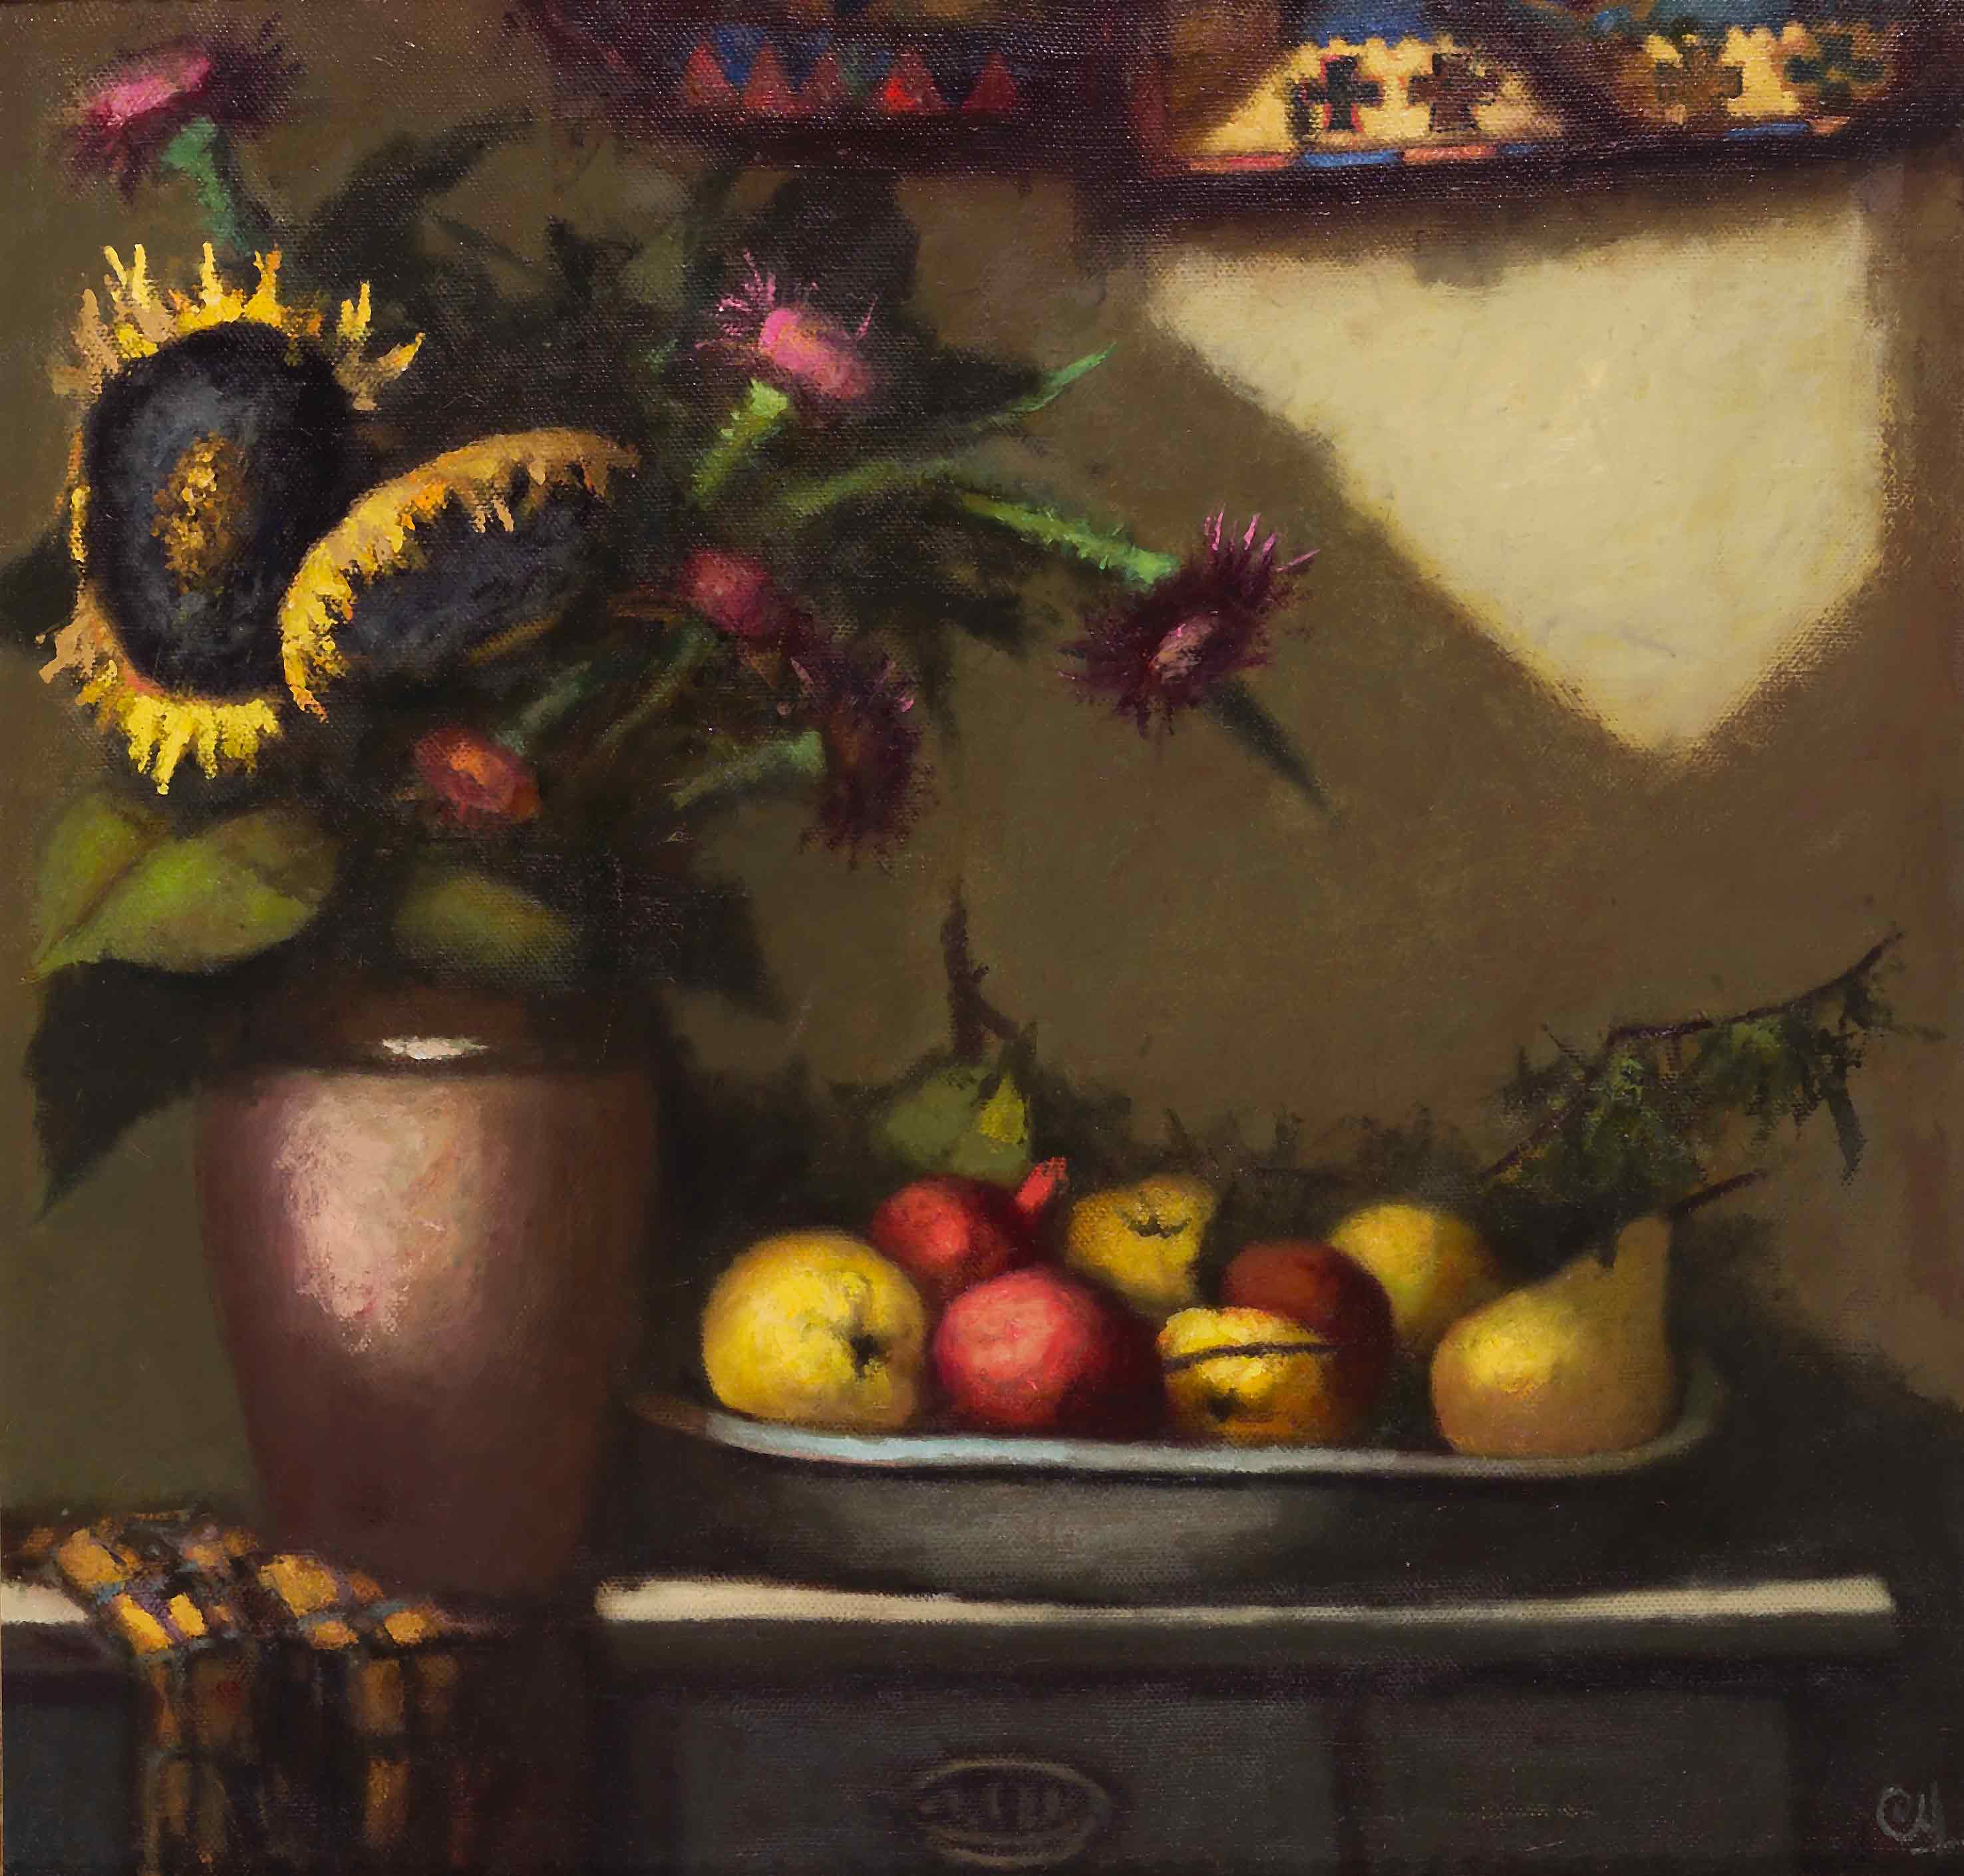 Sunflowers and fruits